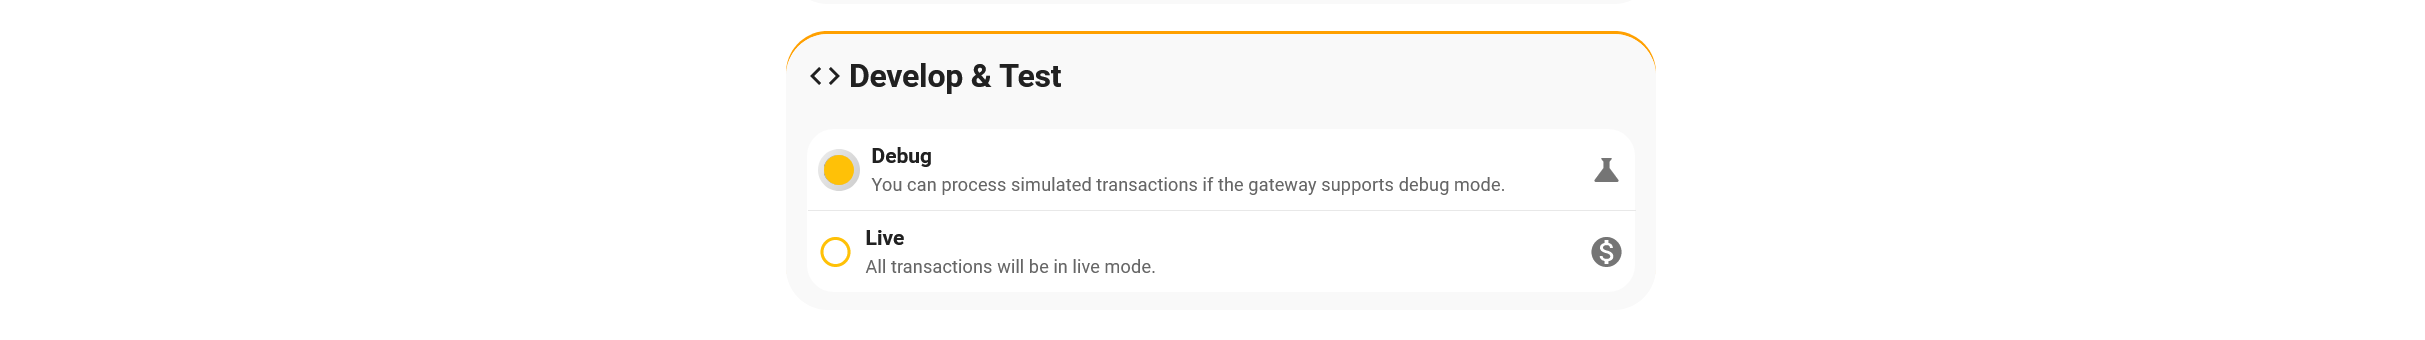 Payment gateway in debug mode